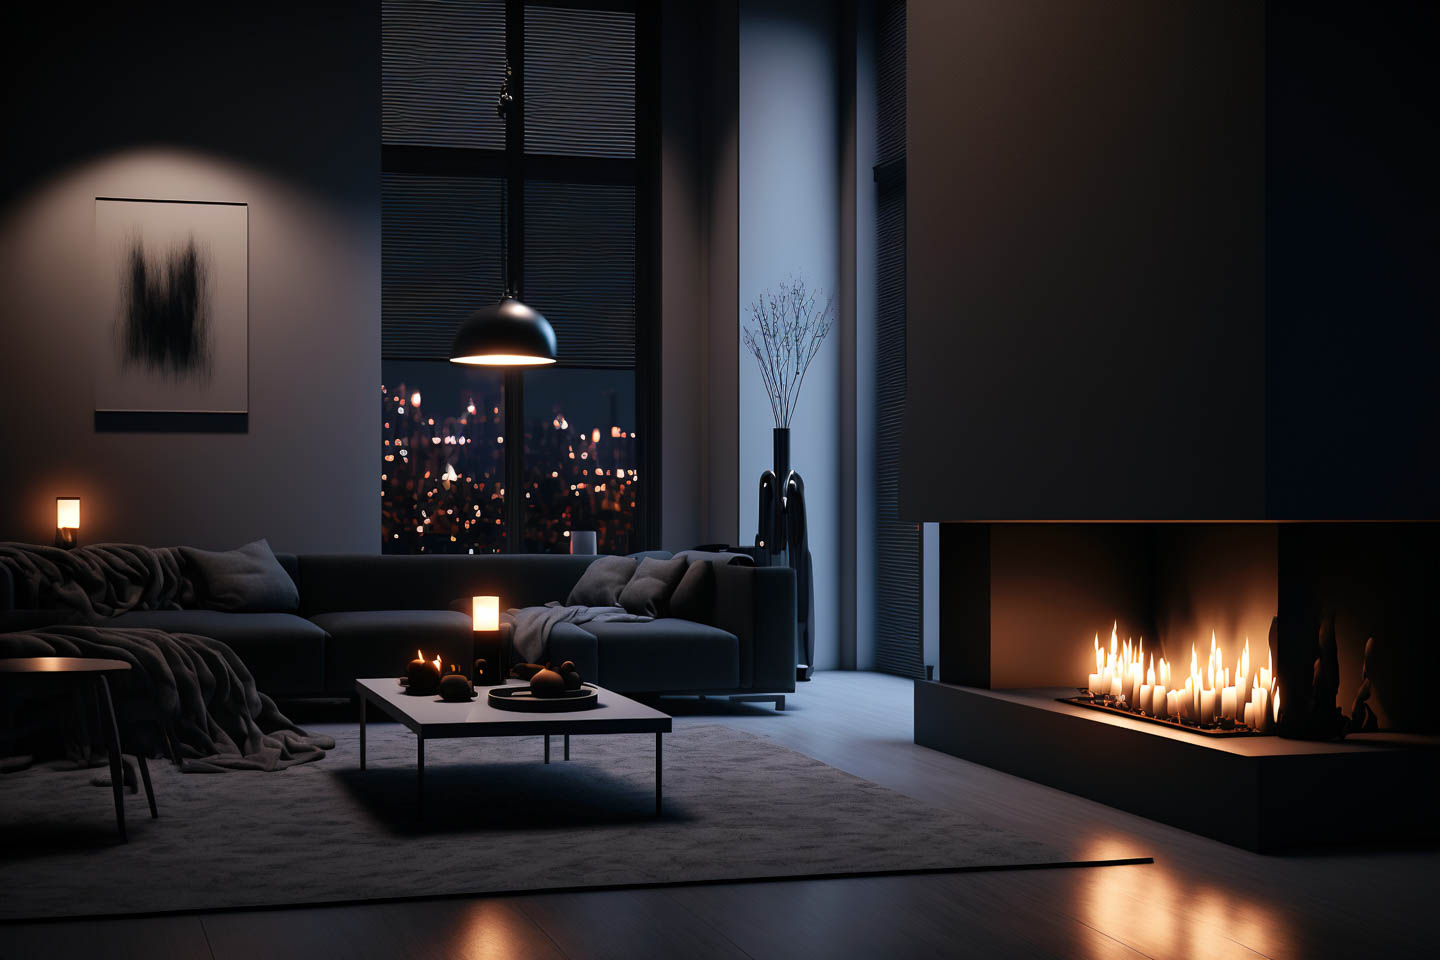 Dark colored living room at nigh with a fireplace and candles